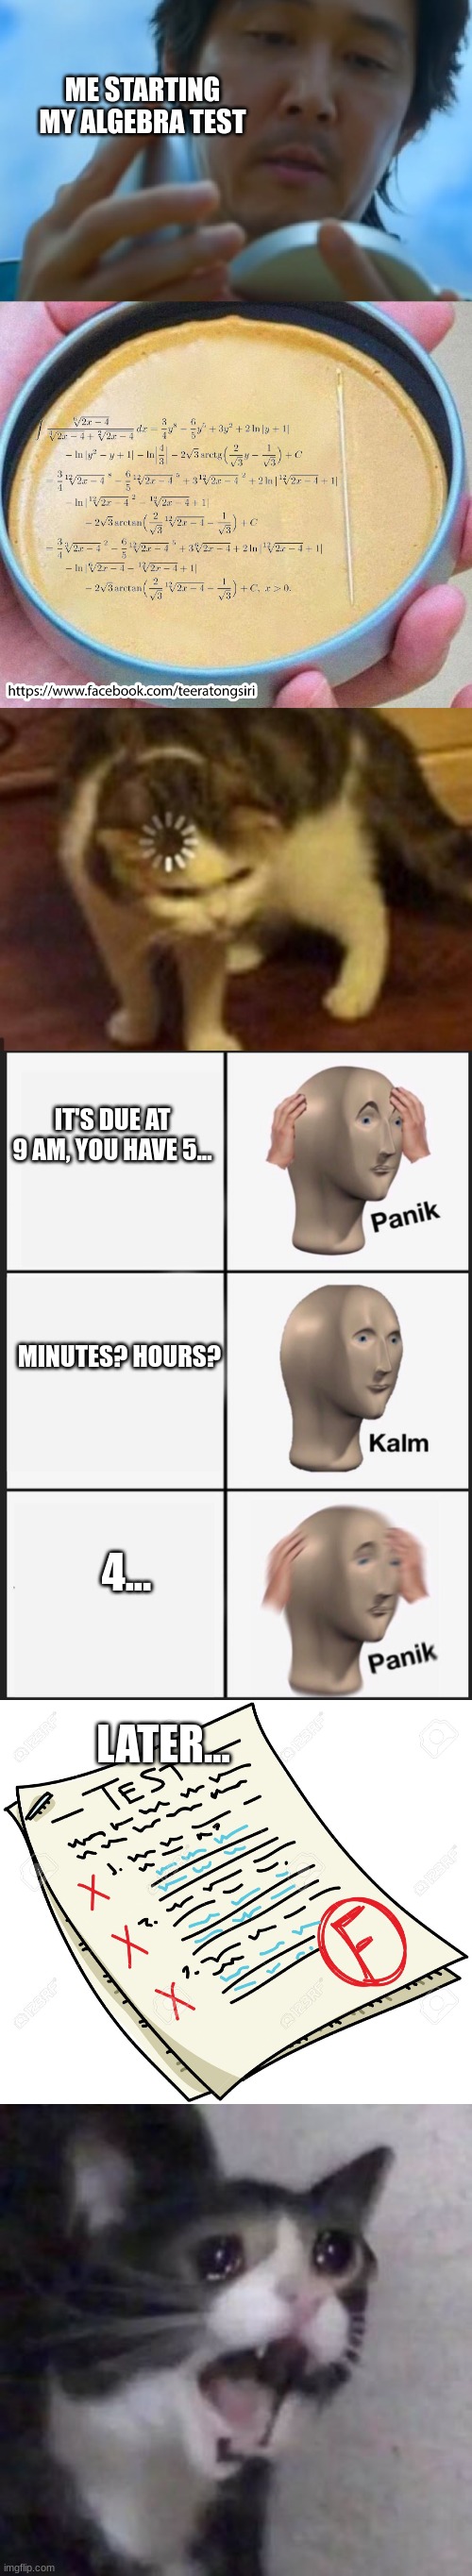 I am pulling my brain cells out while im supposed to be doing khan academy | ME STARTING MY ALGEBRA TEST; IT'S DUE AT 9 AM, YOU HAVE 5... MINUTES? HOURS? 4... LATER... | image tagged in squid game,panik kalm panik,crying cat,failed | made w/ Imgflip meme maker